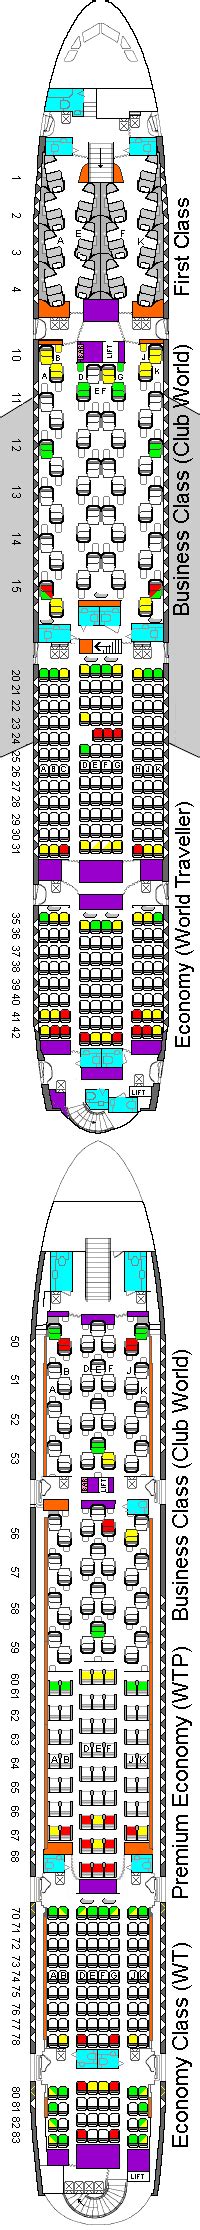 Airbus A380 Seat Chart